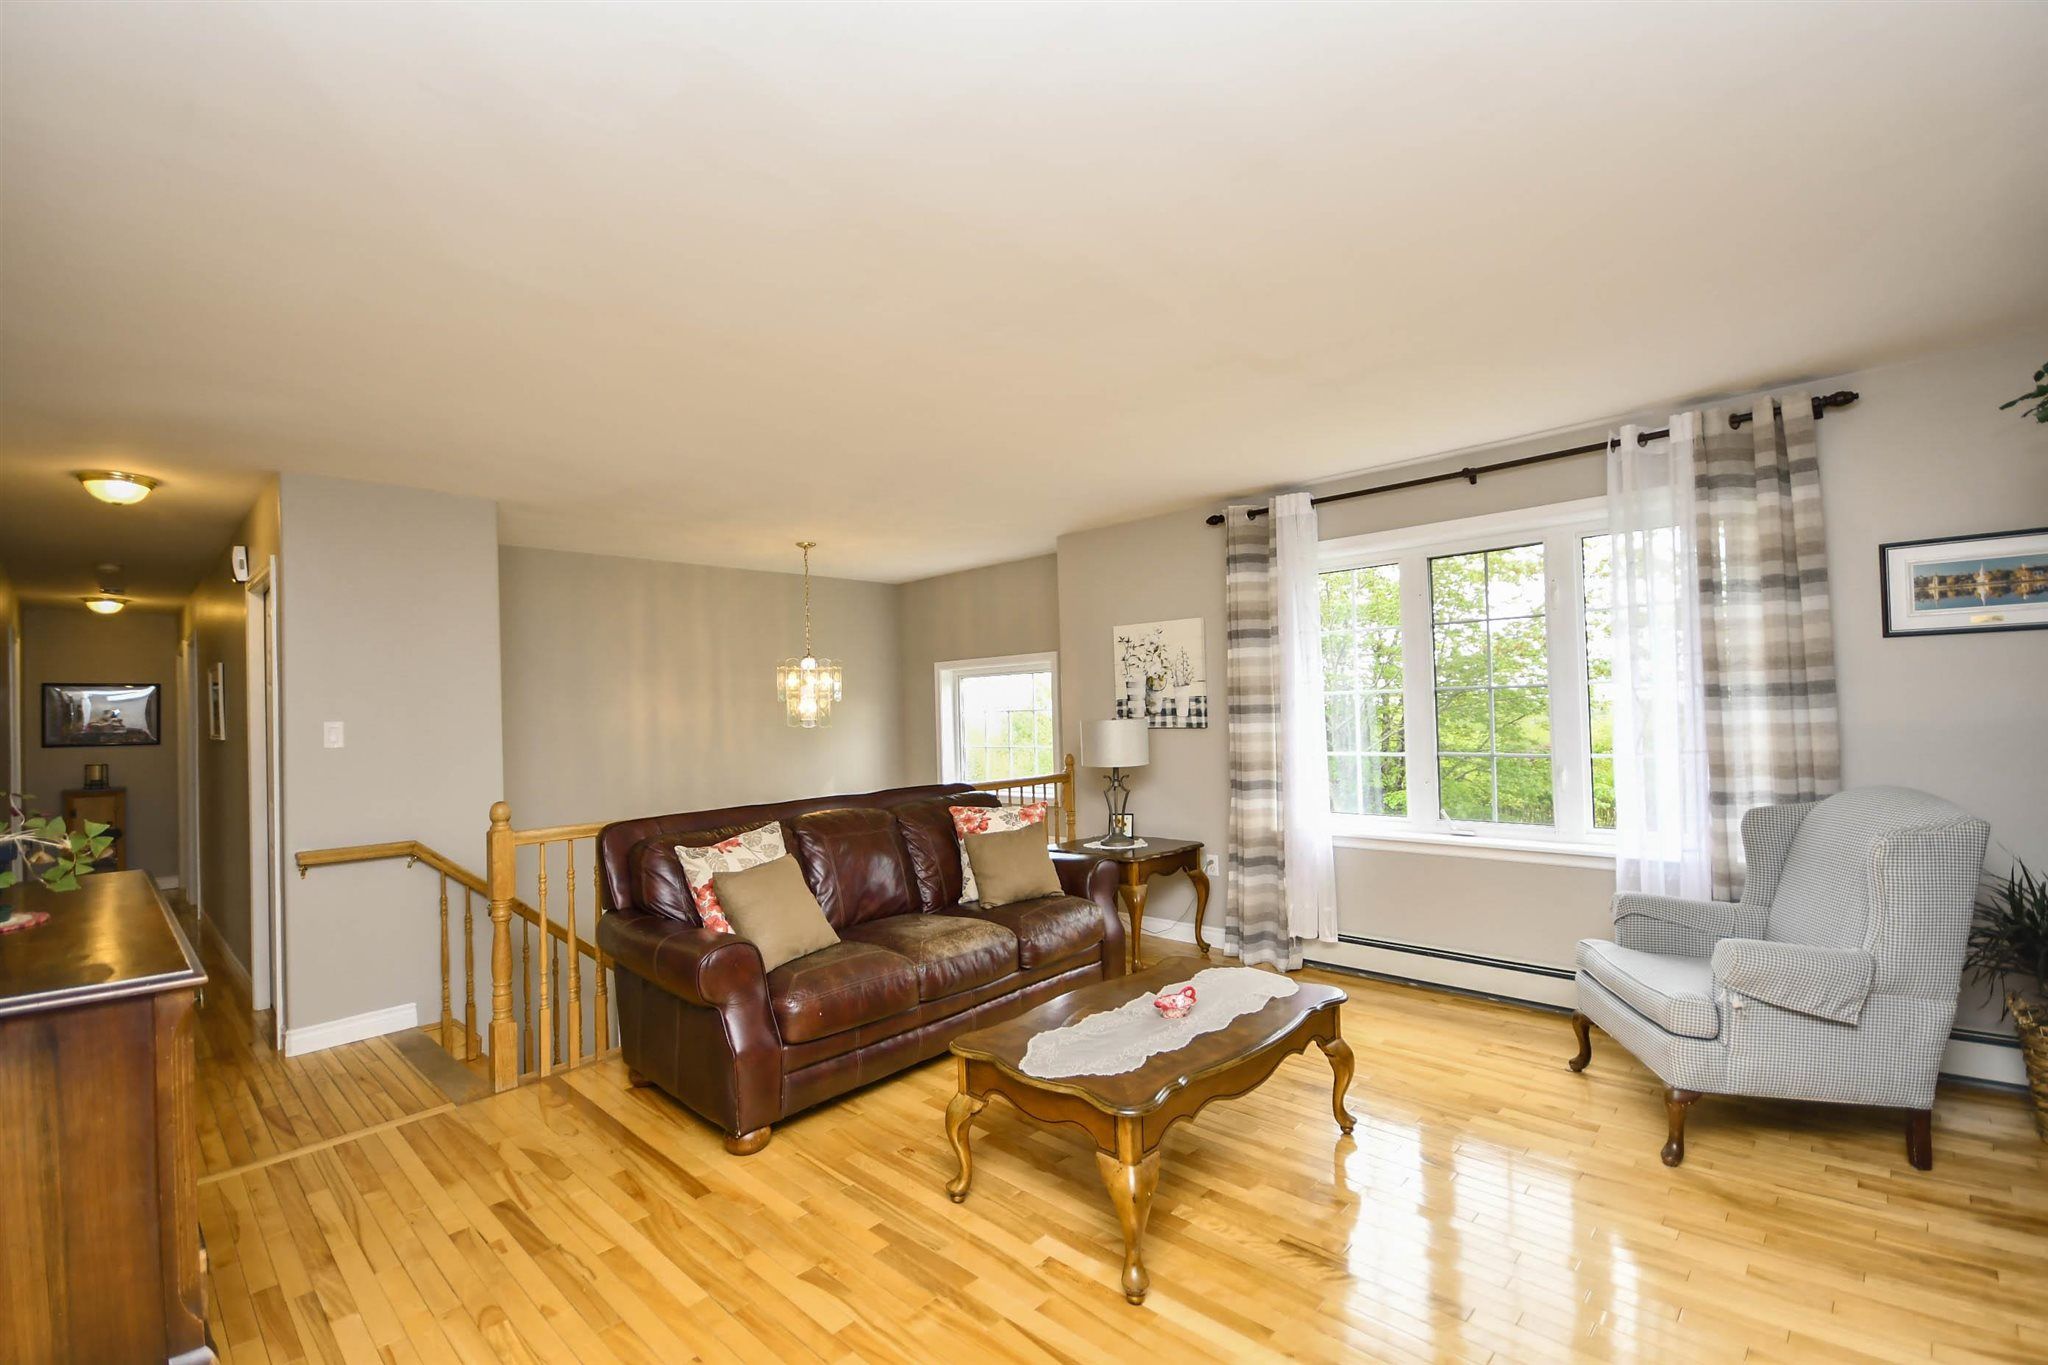 Photo 6: Photos: 290 St George Blvd in Kingswood: 21-Kingswood, Haliburton Hills, Hammonds Pl. Residential for sale (Halifax-Dartmouth)  : MLS®# 202113325